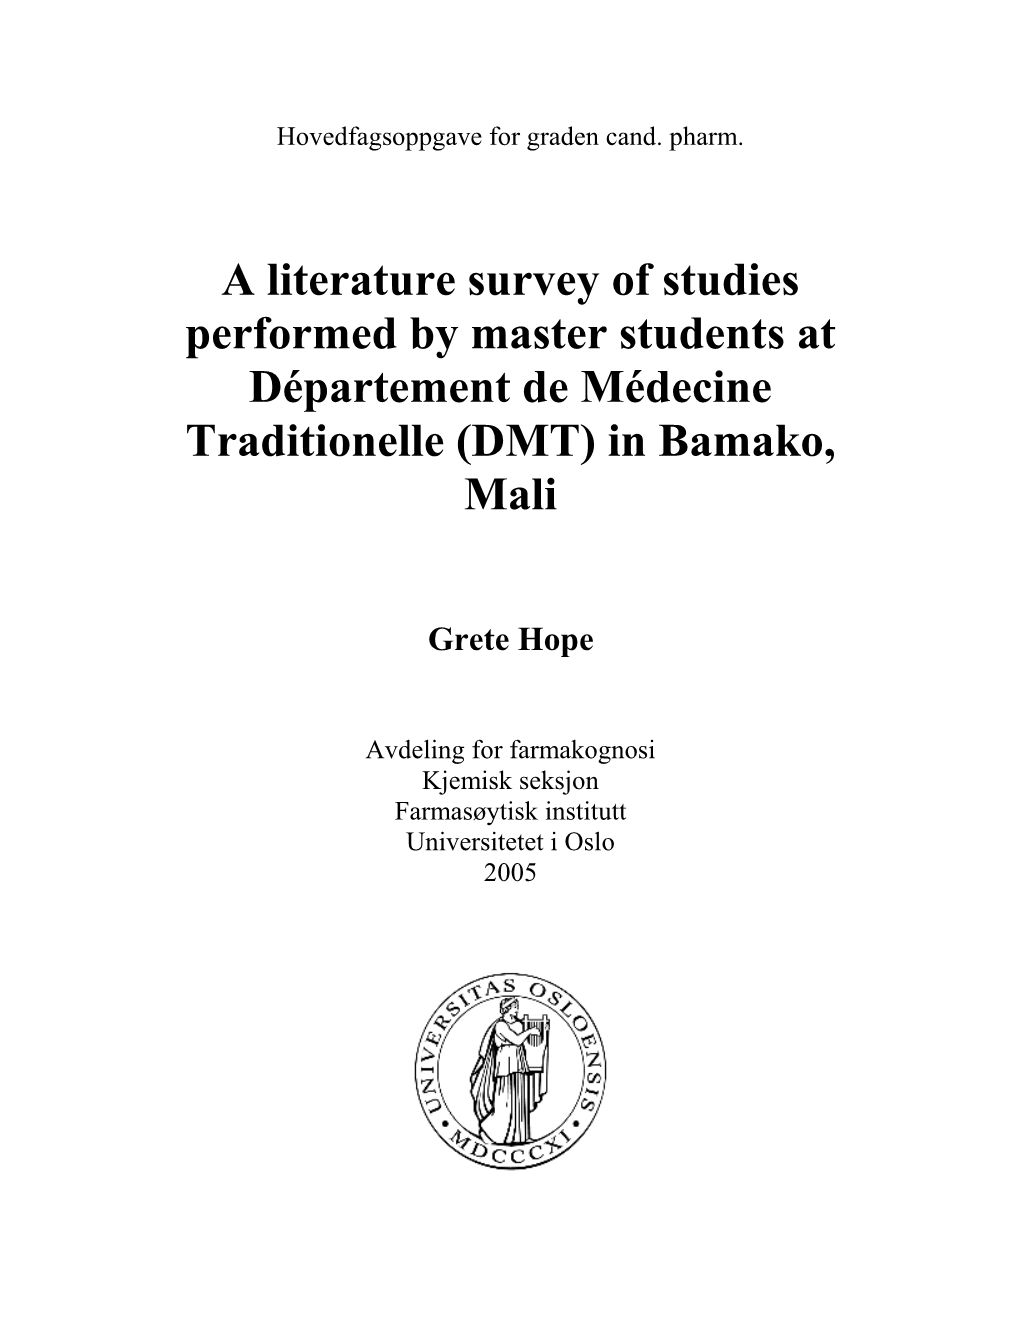 A Literature Survey of Studies Performed by Master Students at Département De Médecine Traditionelle (DMT) in Bamako, Mali